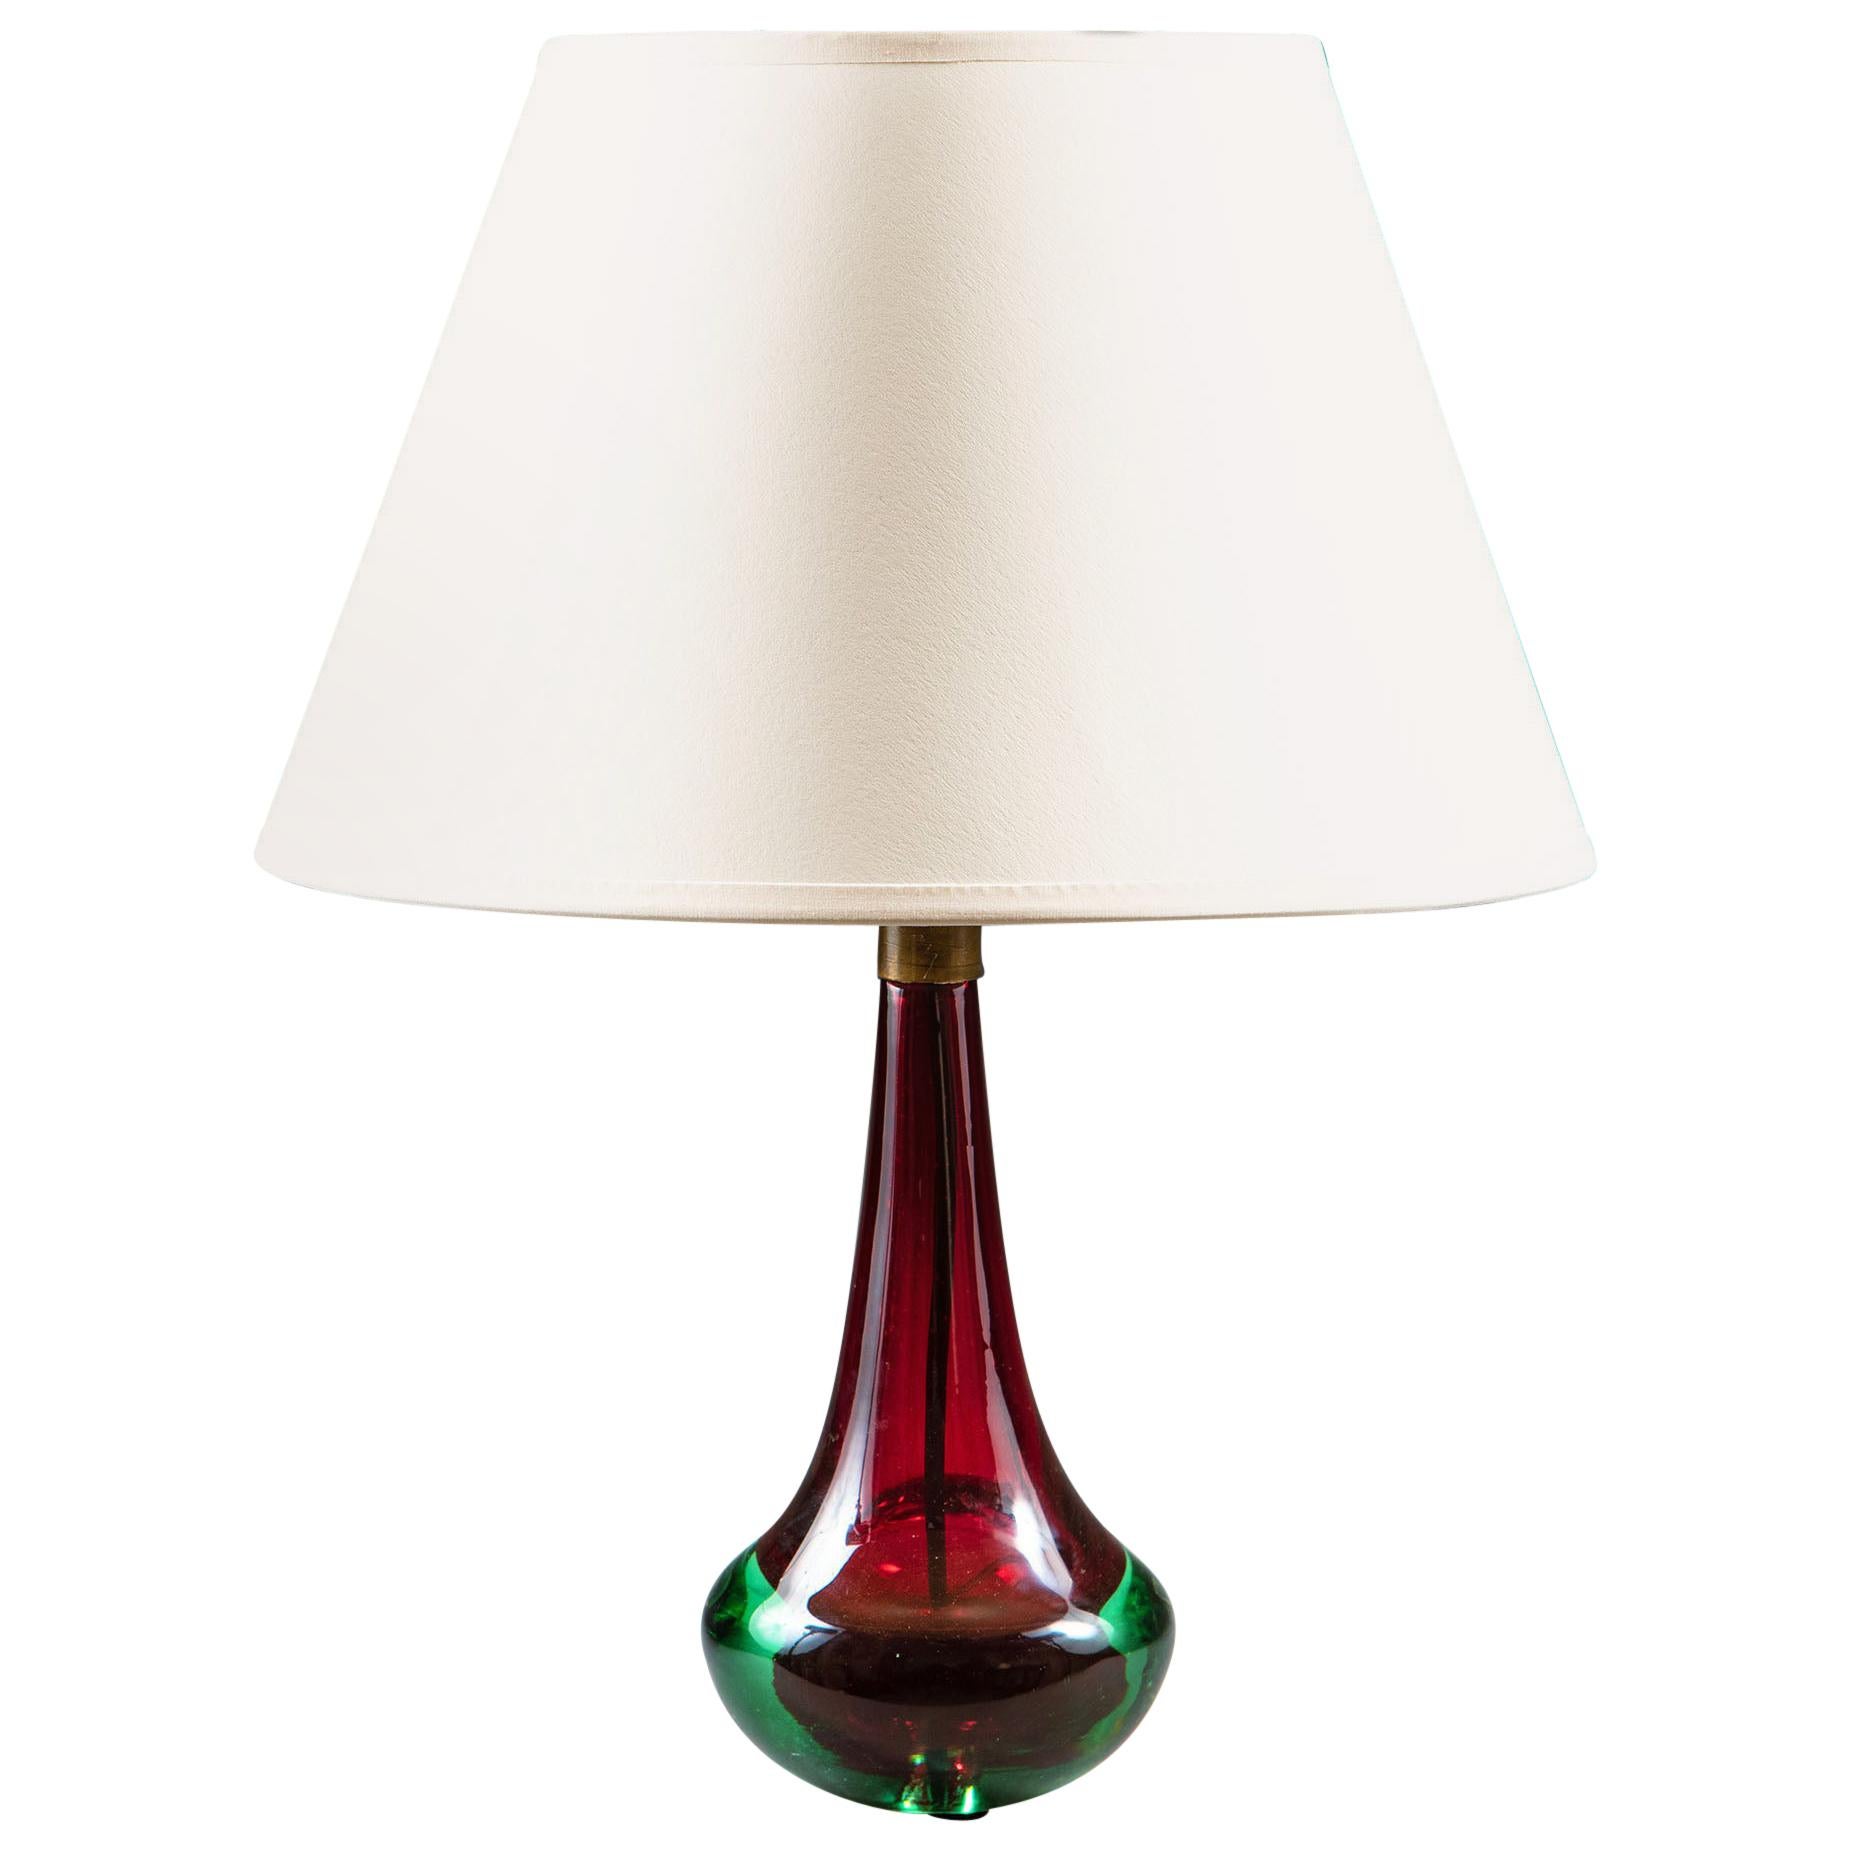 Midcentury Red and Green Italian Murano Glass Table Lamp